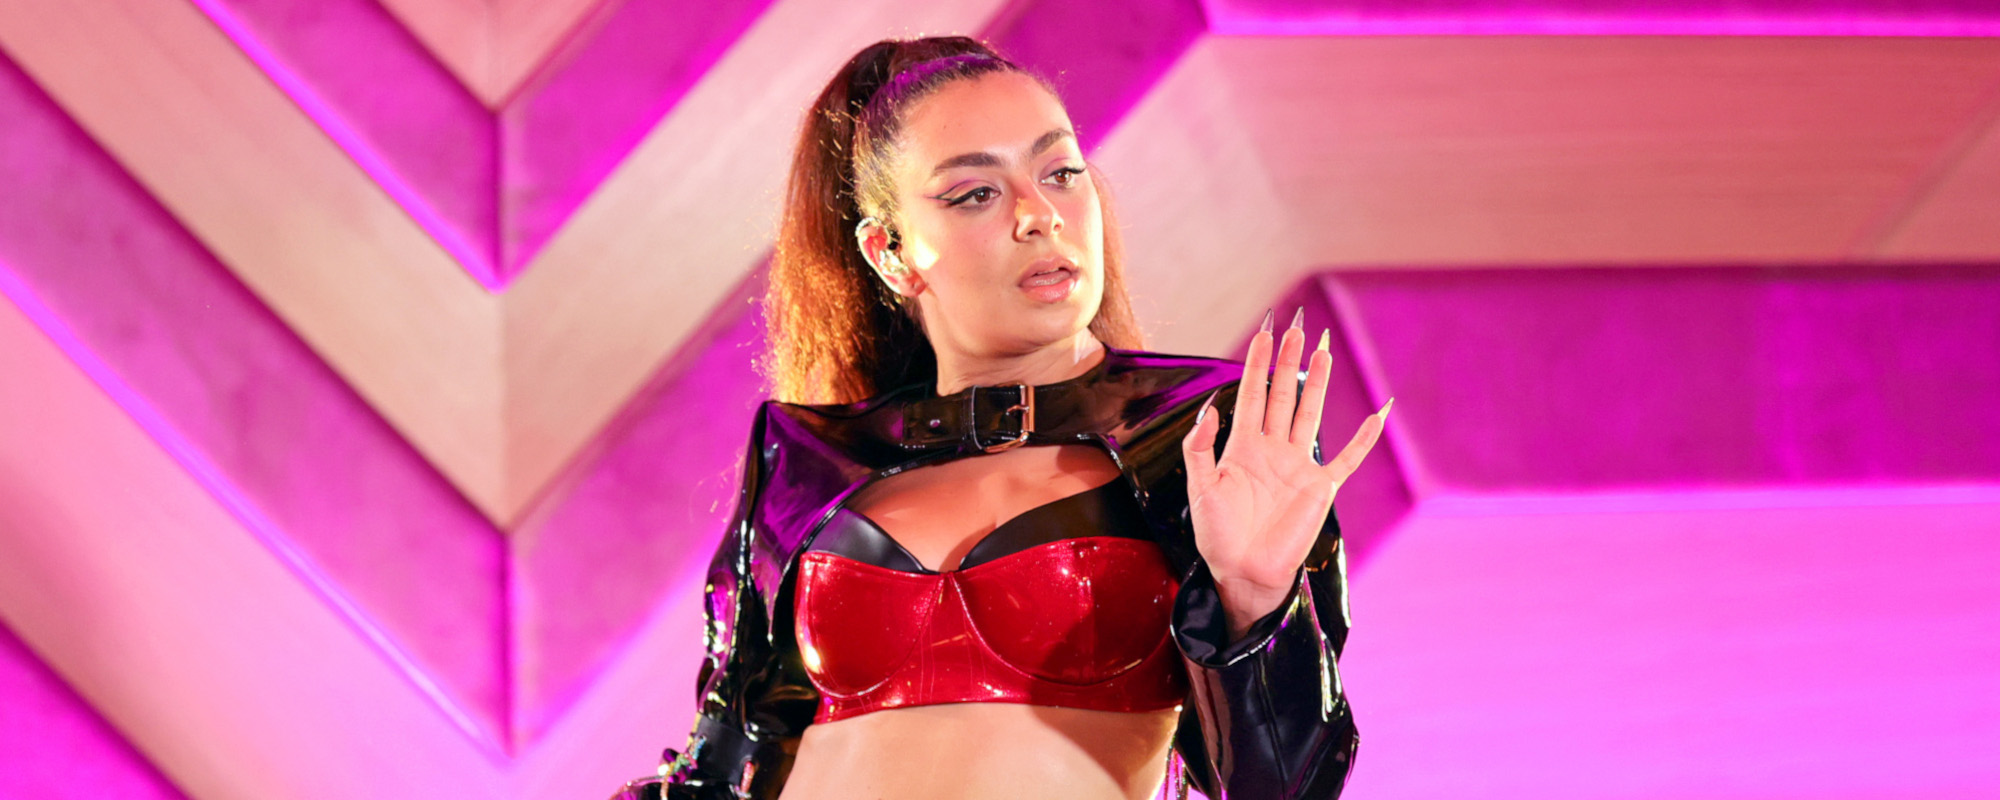 Charli XCX Brings Her Sultry Style to ‘Saturday Night Live’ with Two Performances and a Meatball Sketch